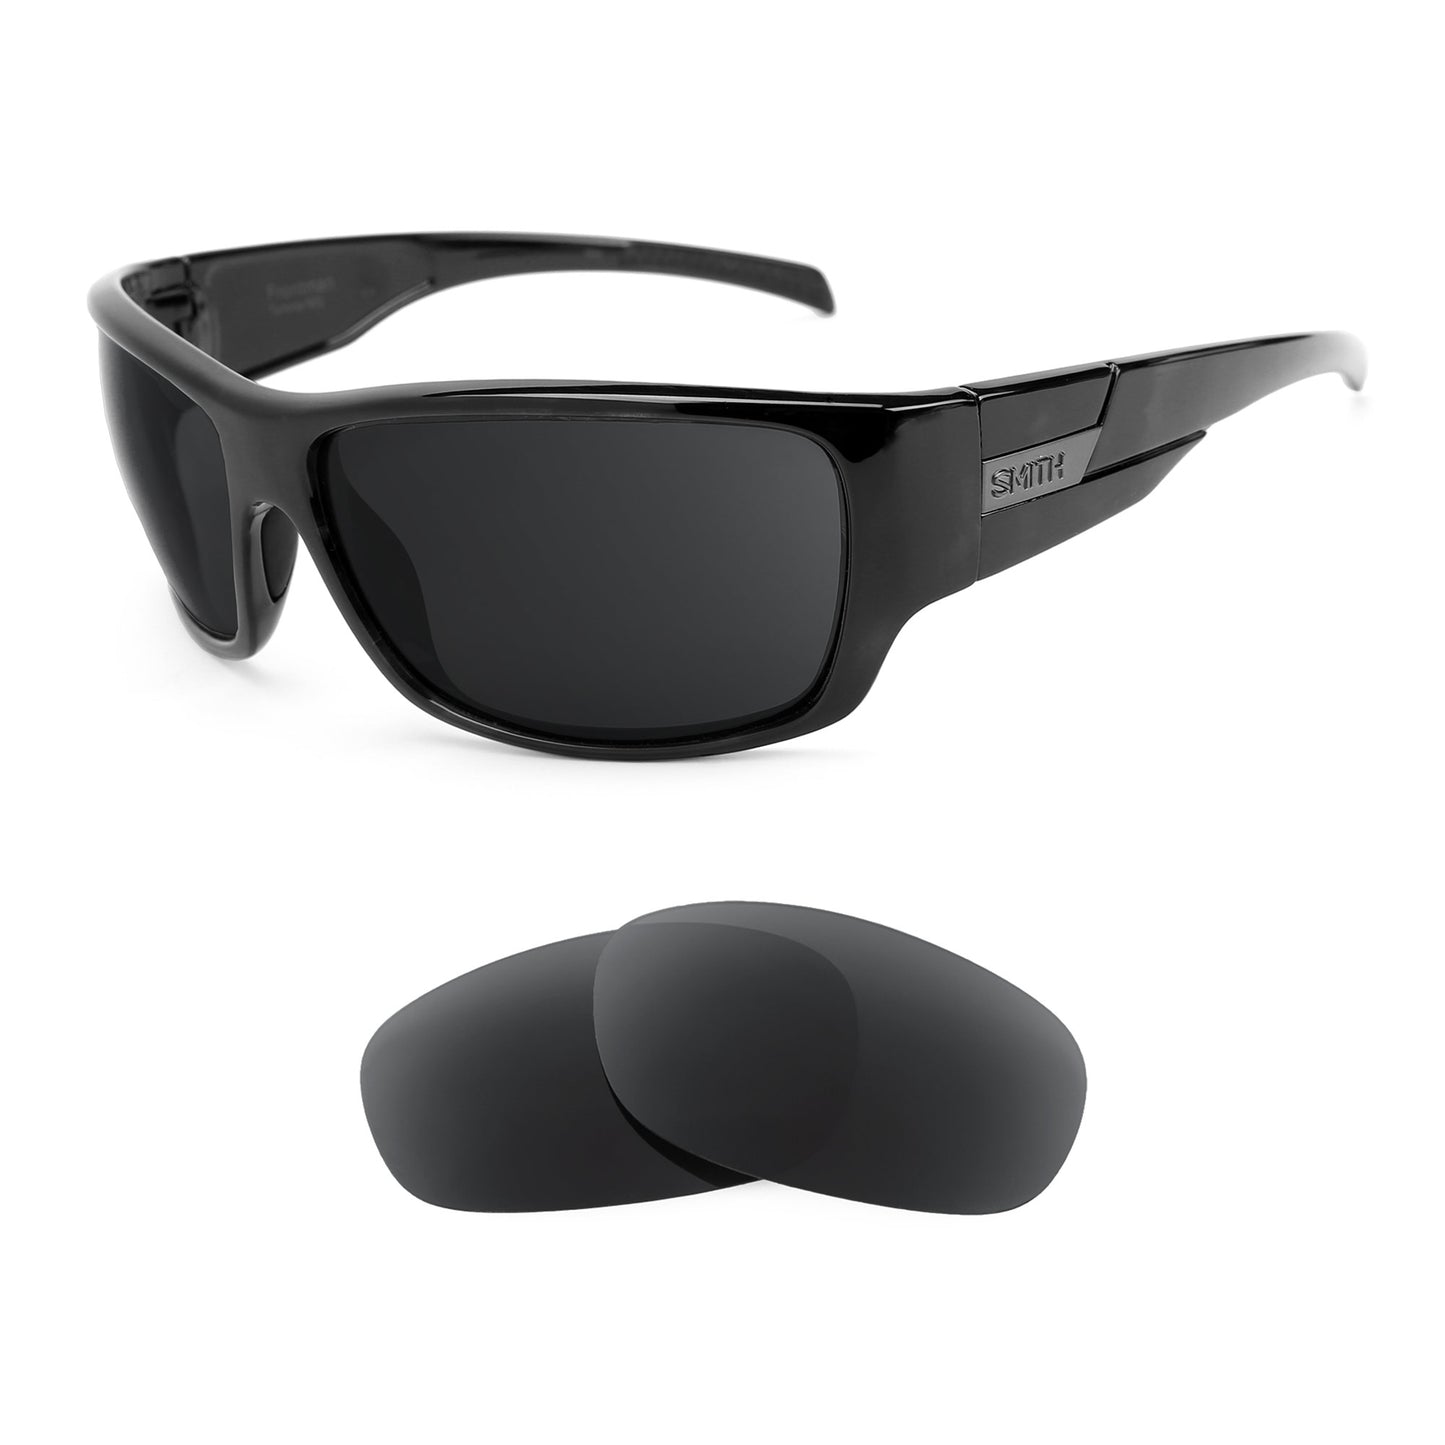 Smith Frontman sunglasses with replacement lenses